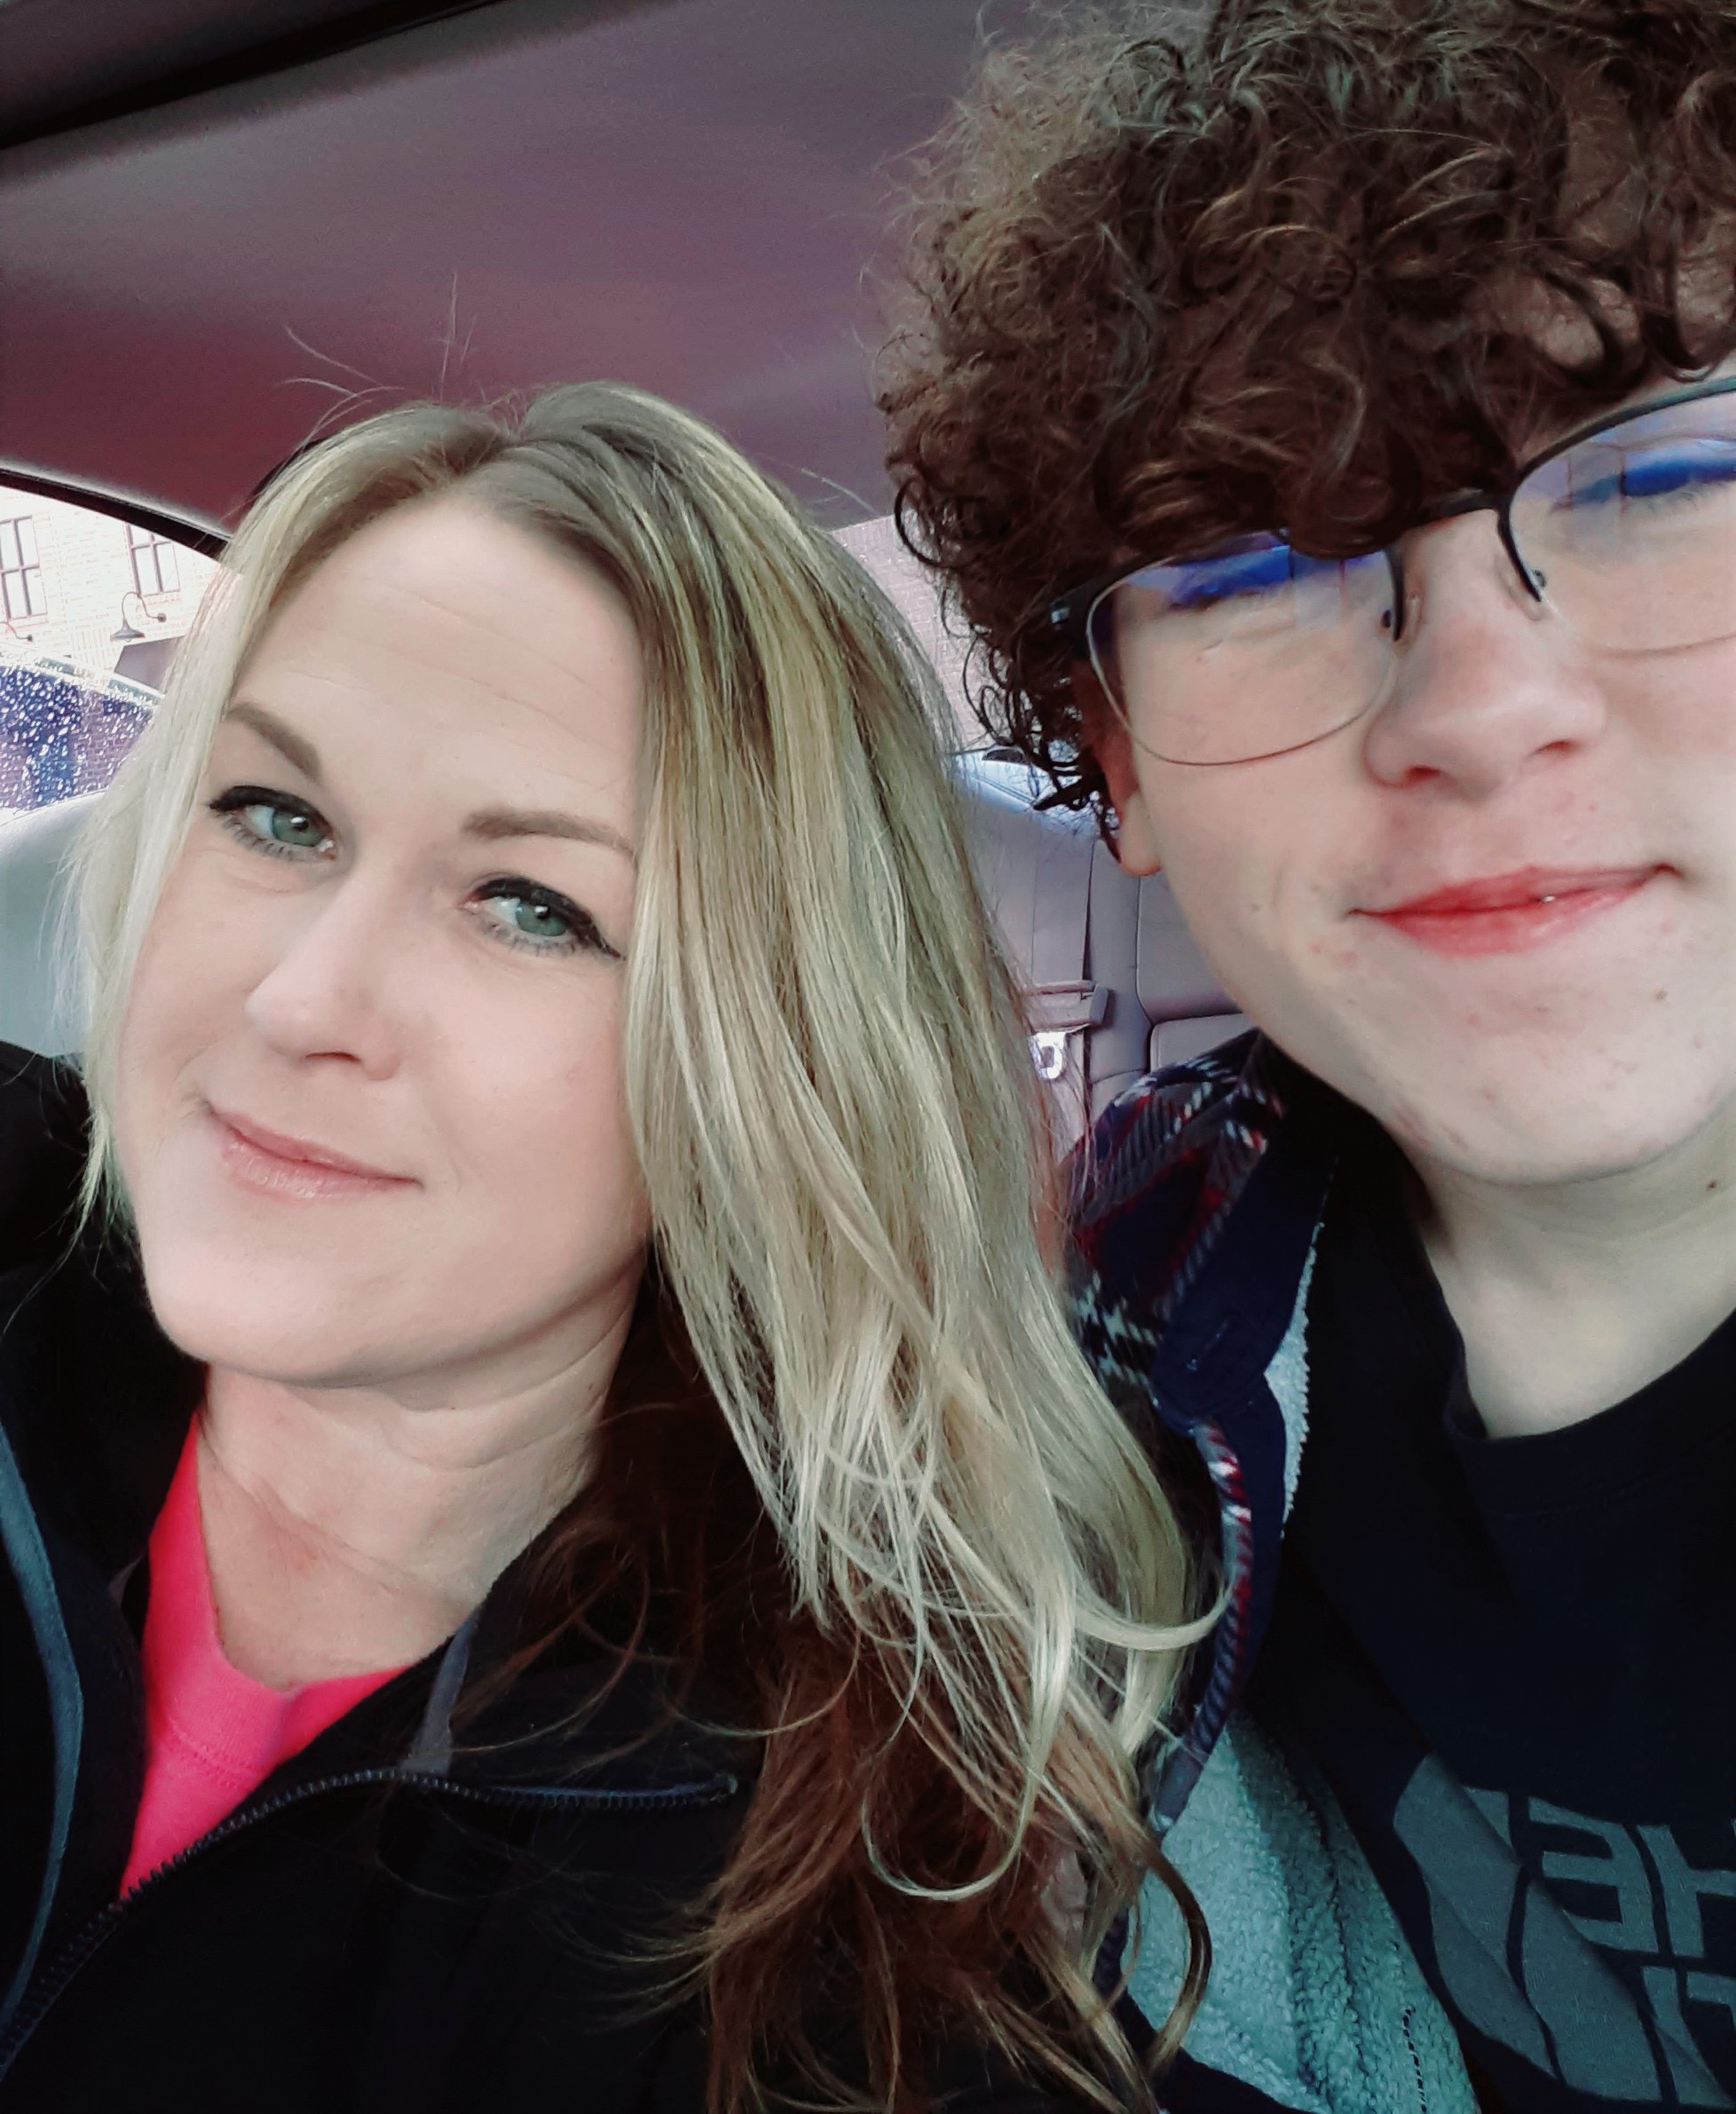 Jill Soave and her son, Justin Shilling, in a selfie photo